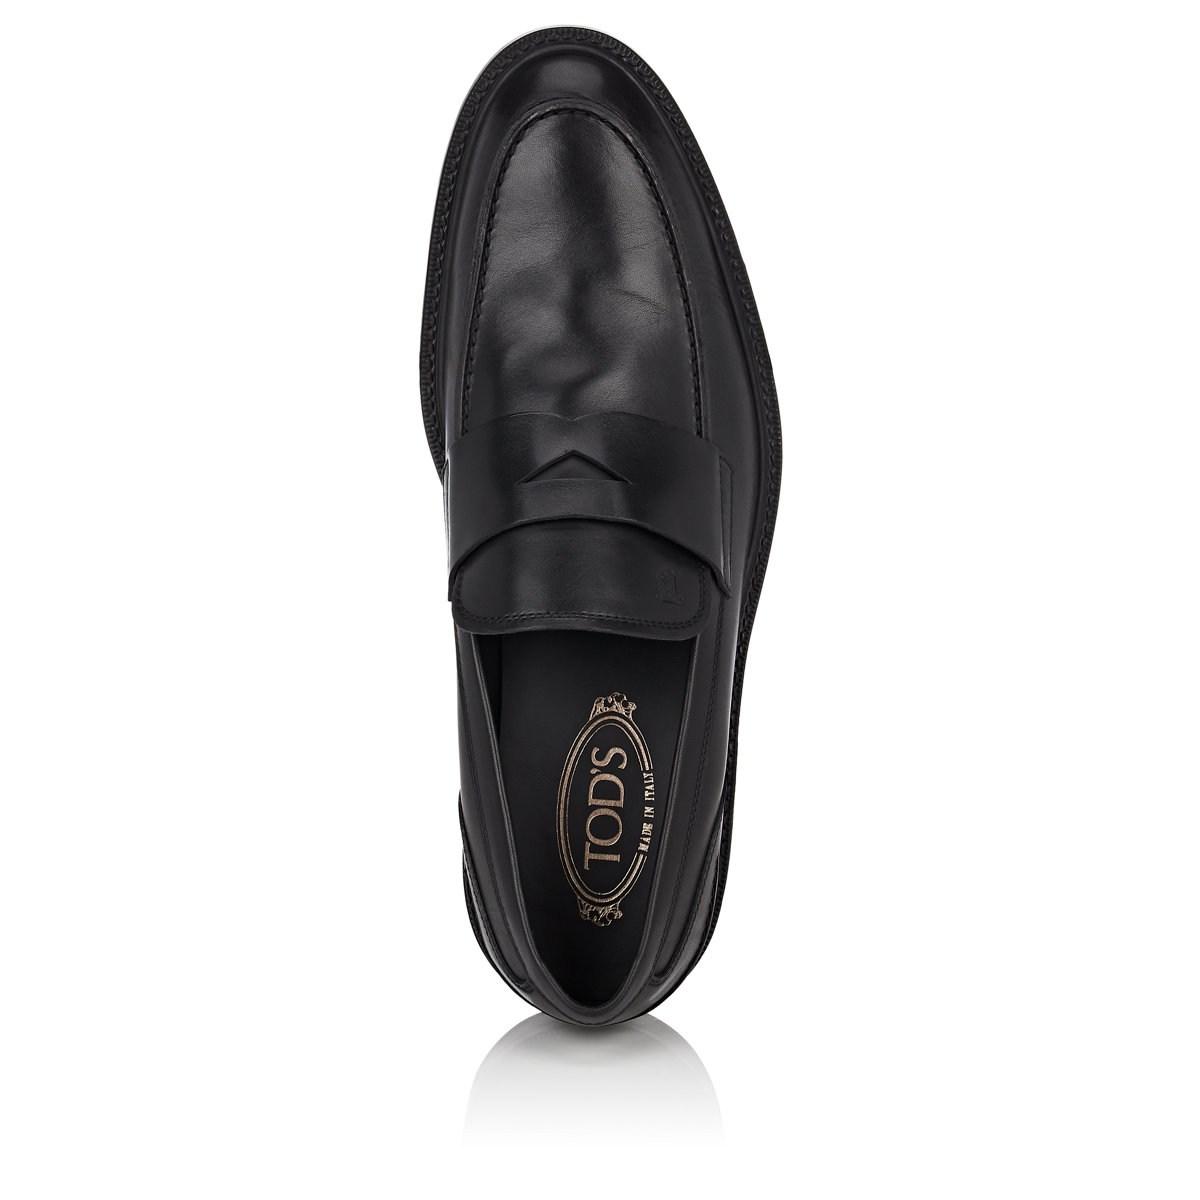 Tod's Leather Penny Loafers in Black for Men - Lyst